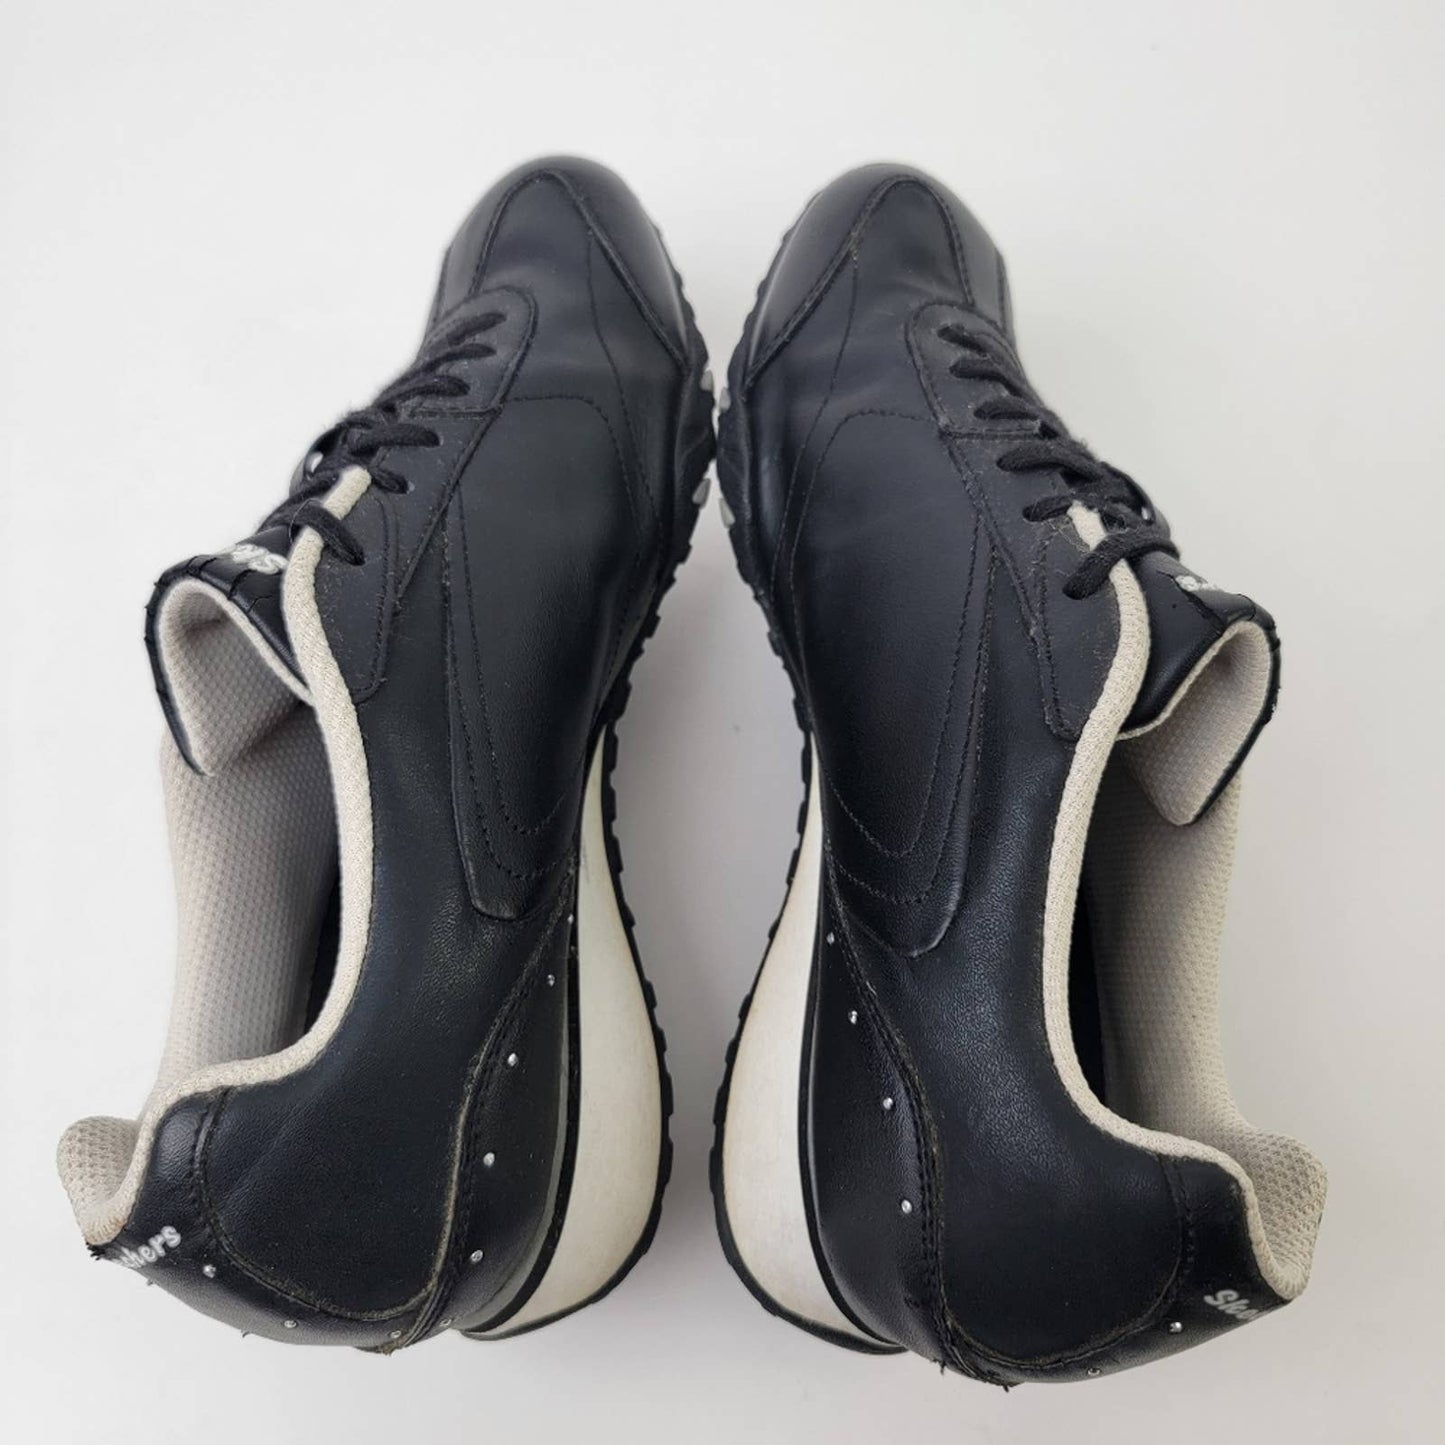 Vintage 2010 Skechers Black White Athletic Leather Running Tennis Shoes - 10=